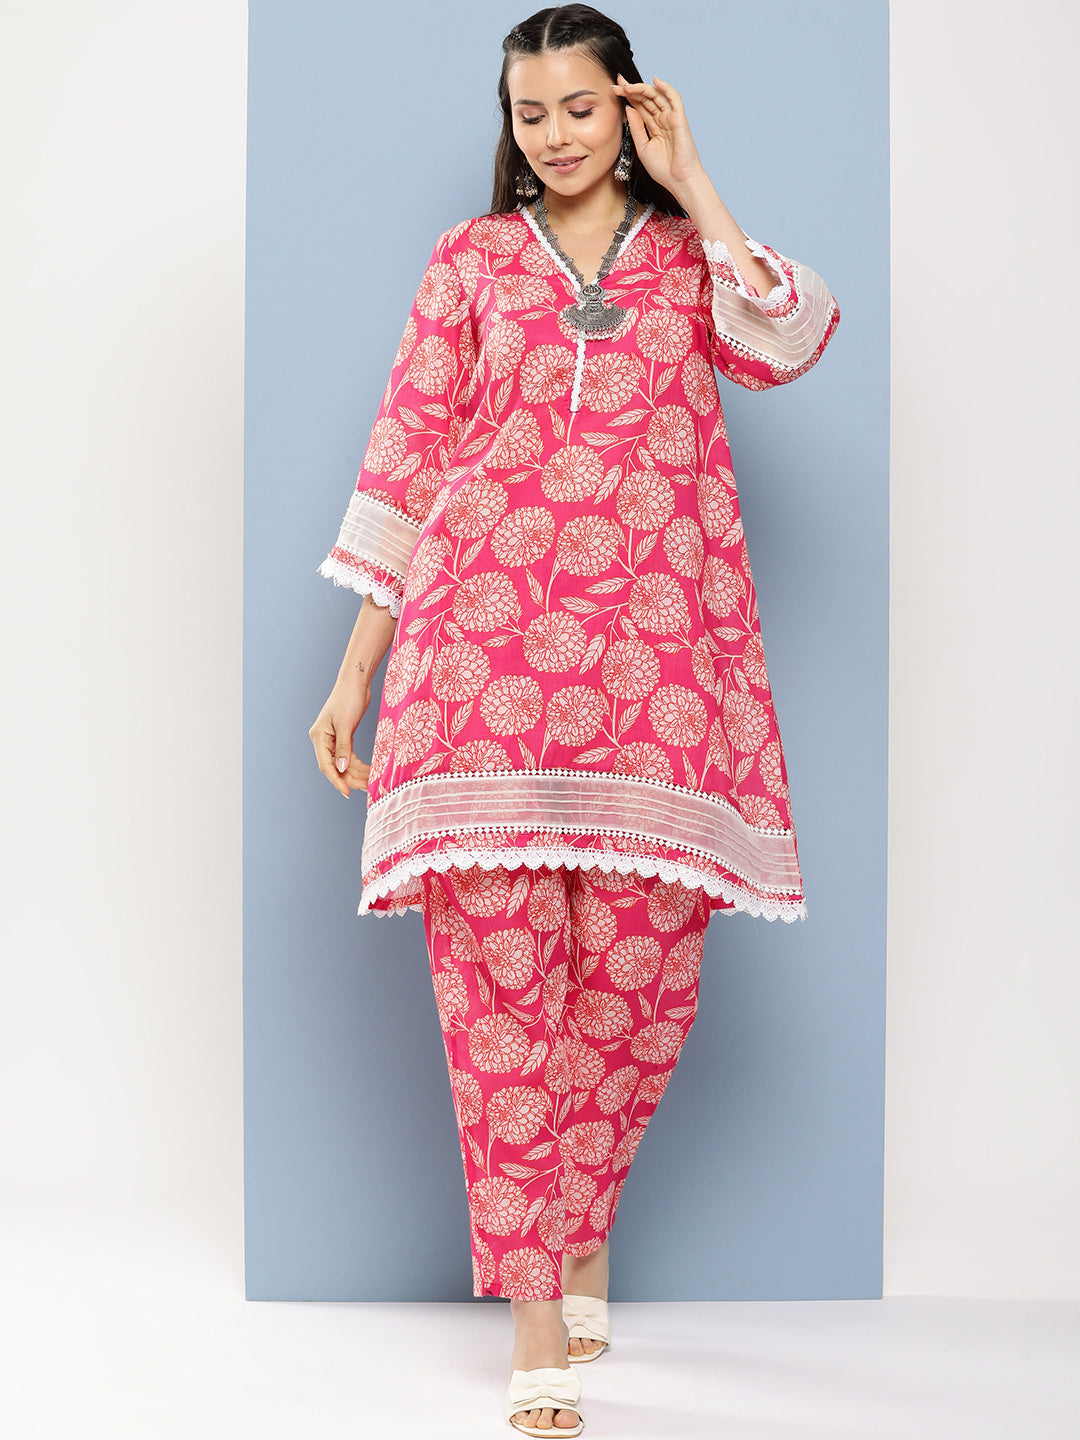 Women's Pink Floral Print A- Line Kurta With Lace Detailing & Pink Floral Print Trousers - Bhama Couture